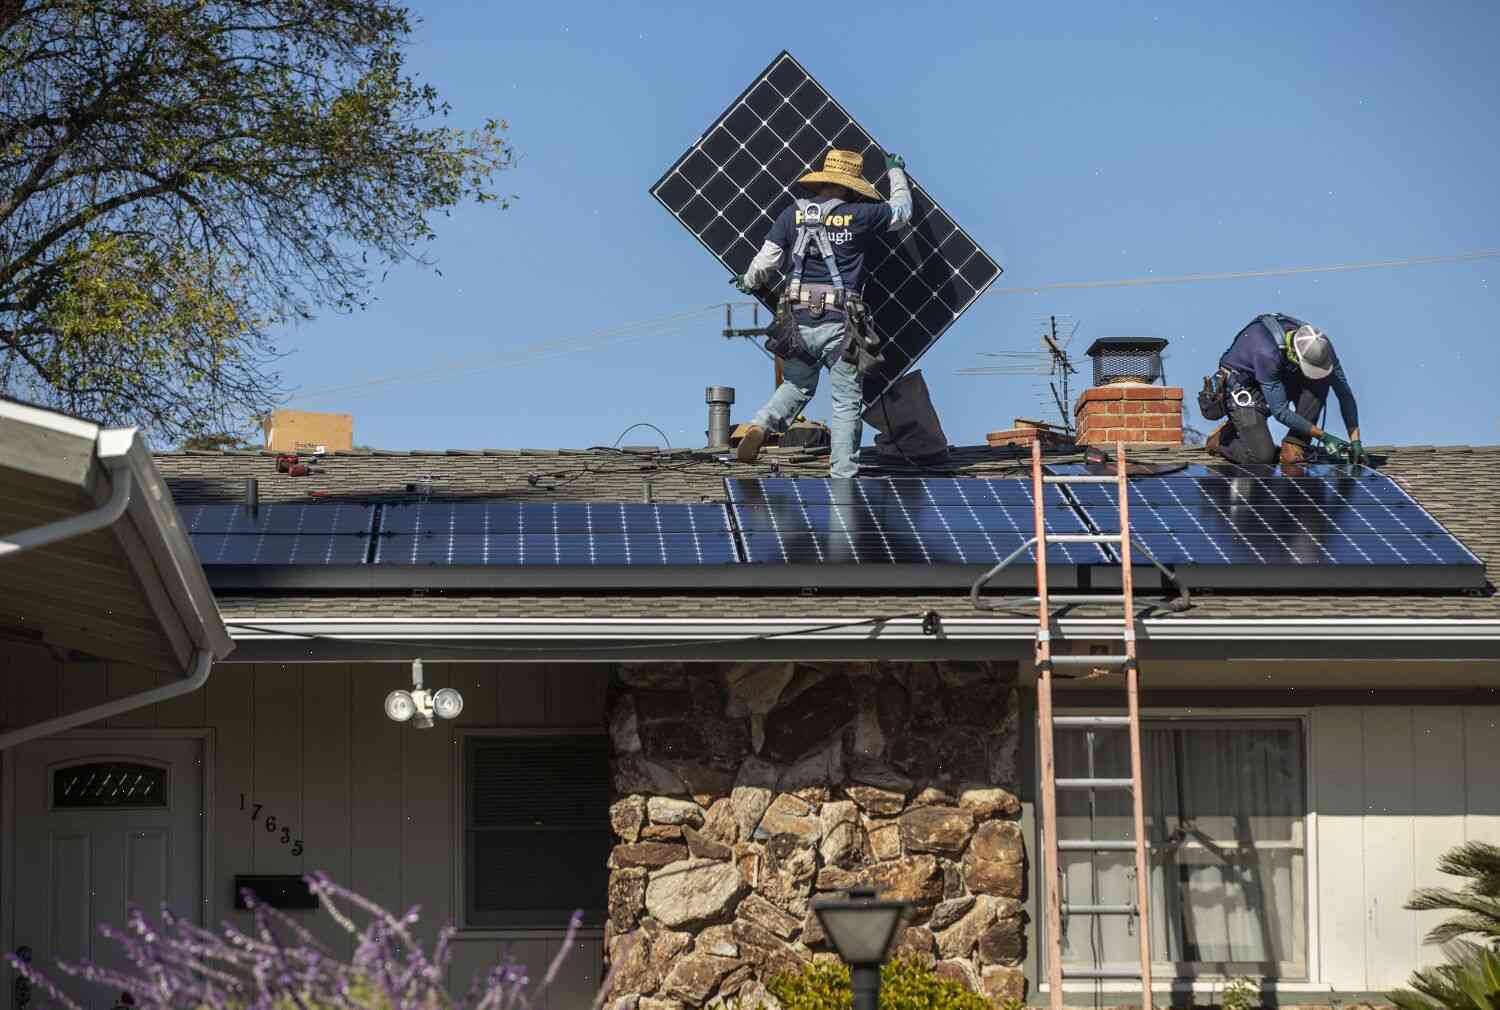 Newsom’s proposal to cap rooftop solar subsidies is a sham